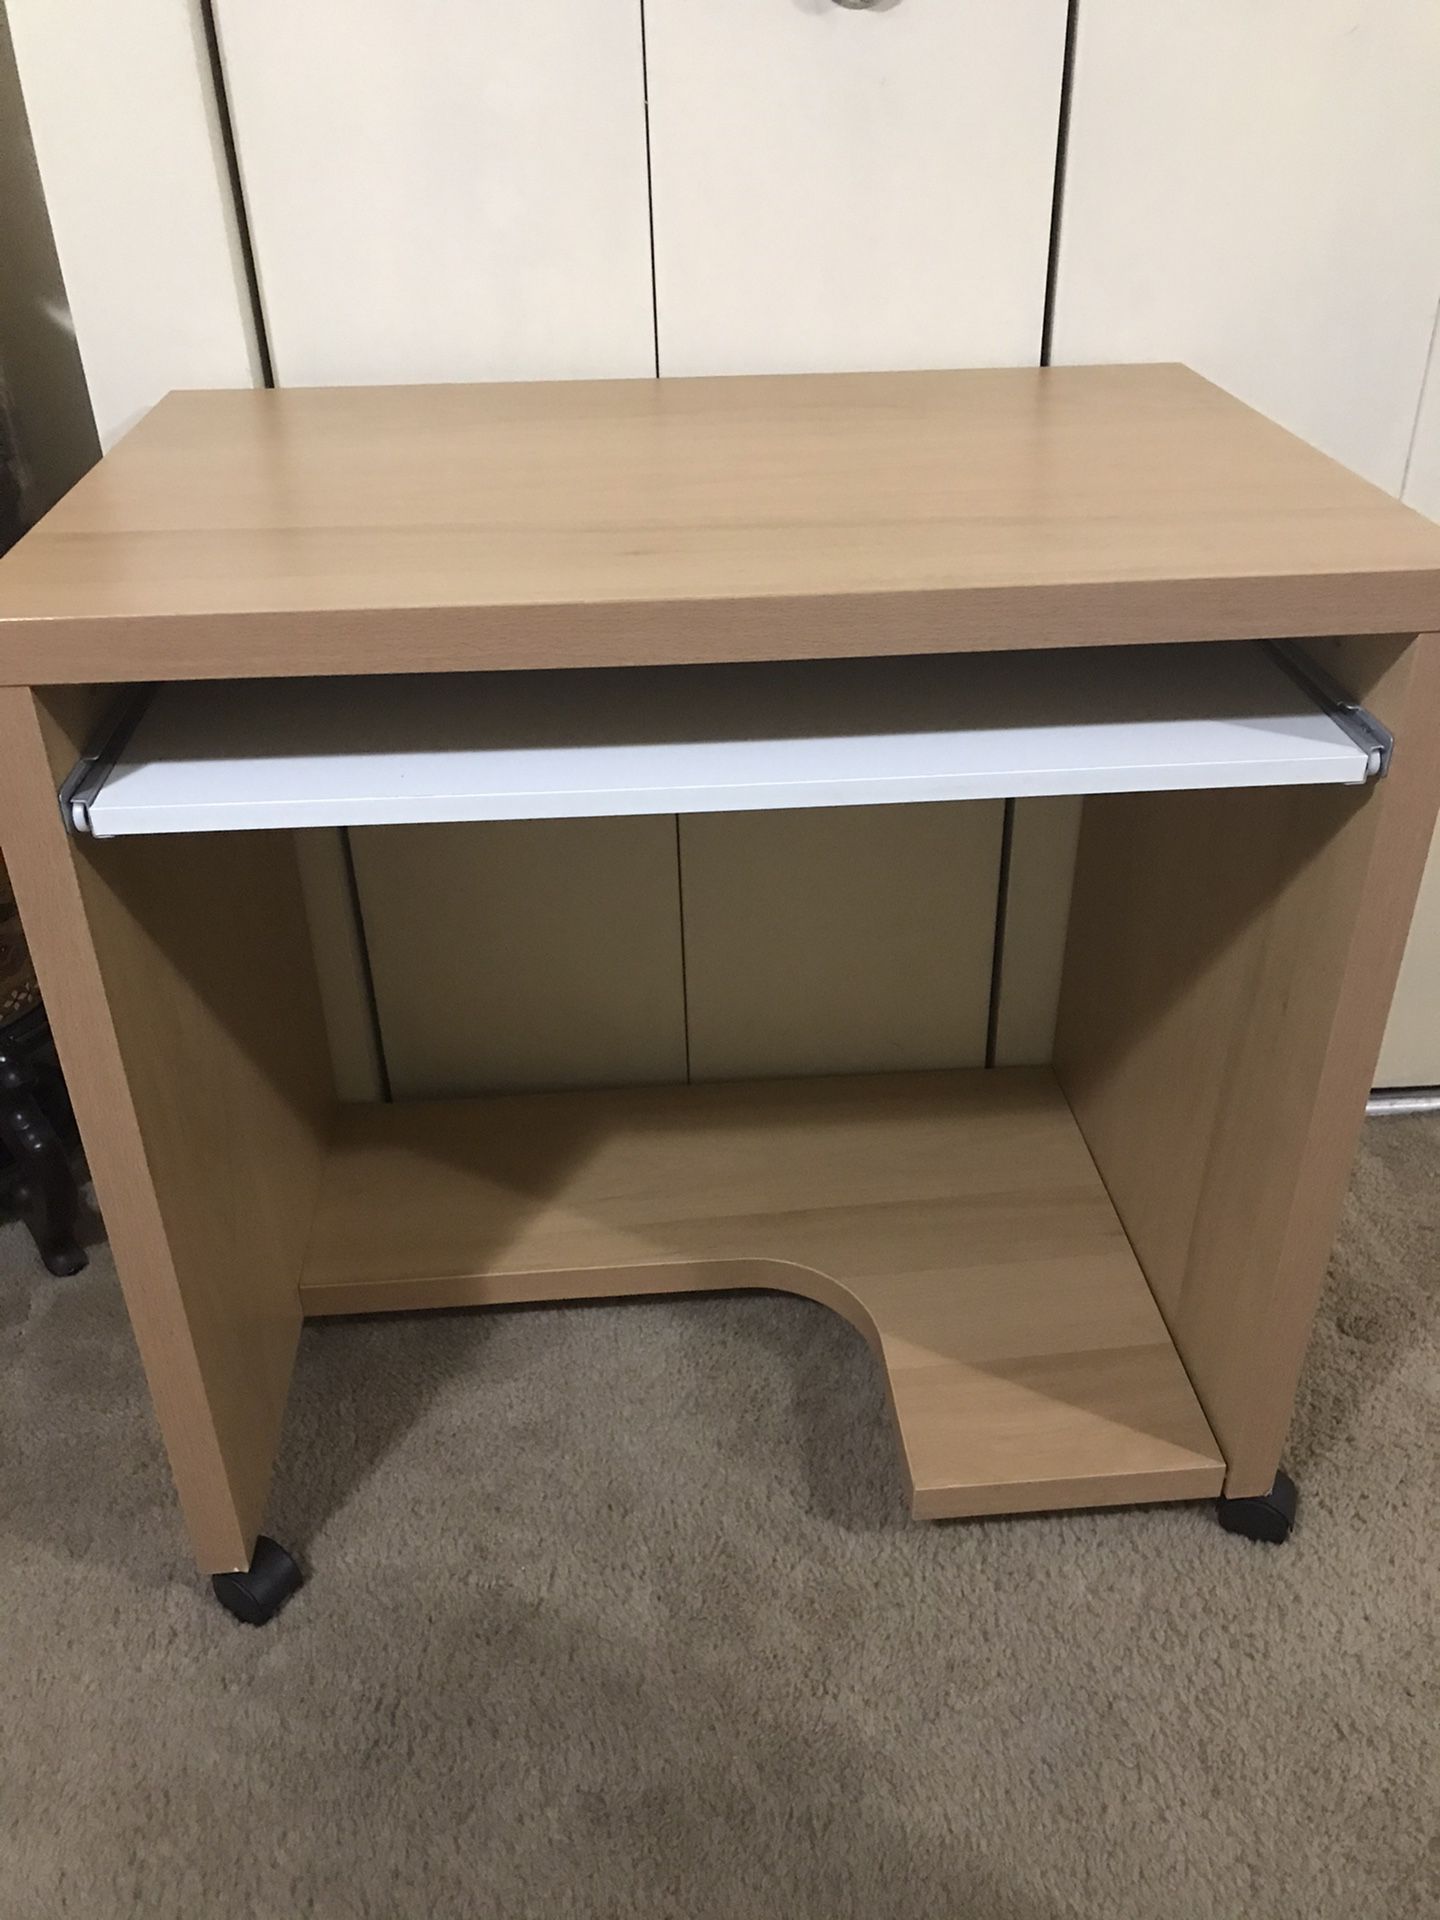 Still available 30x30” office computer desk pick up in Gaithersburg md20877